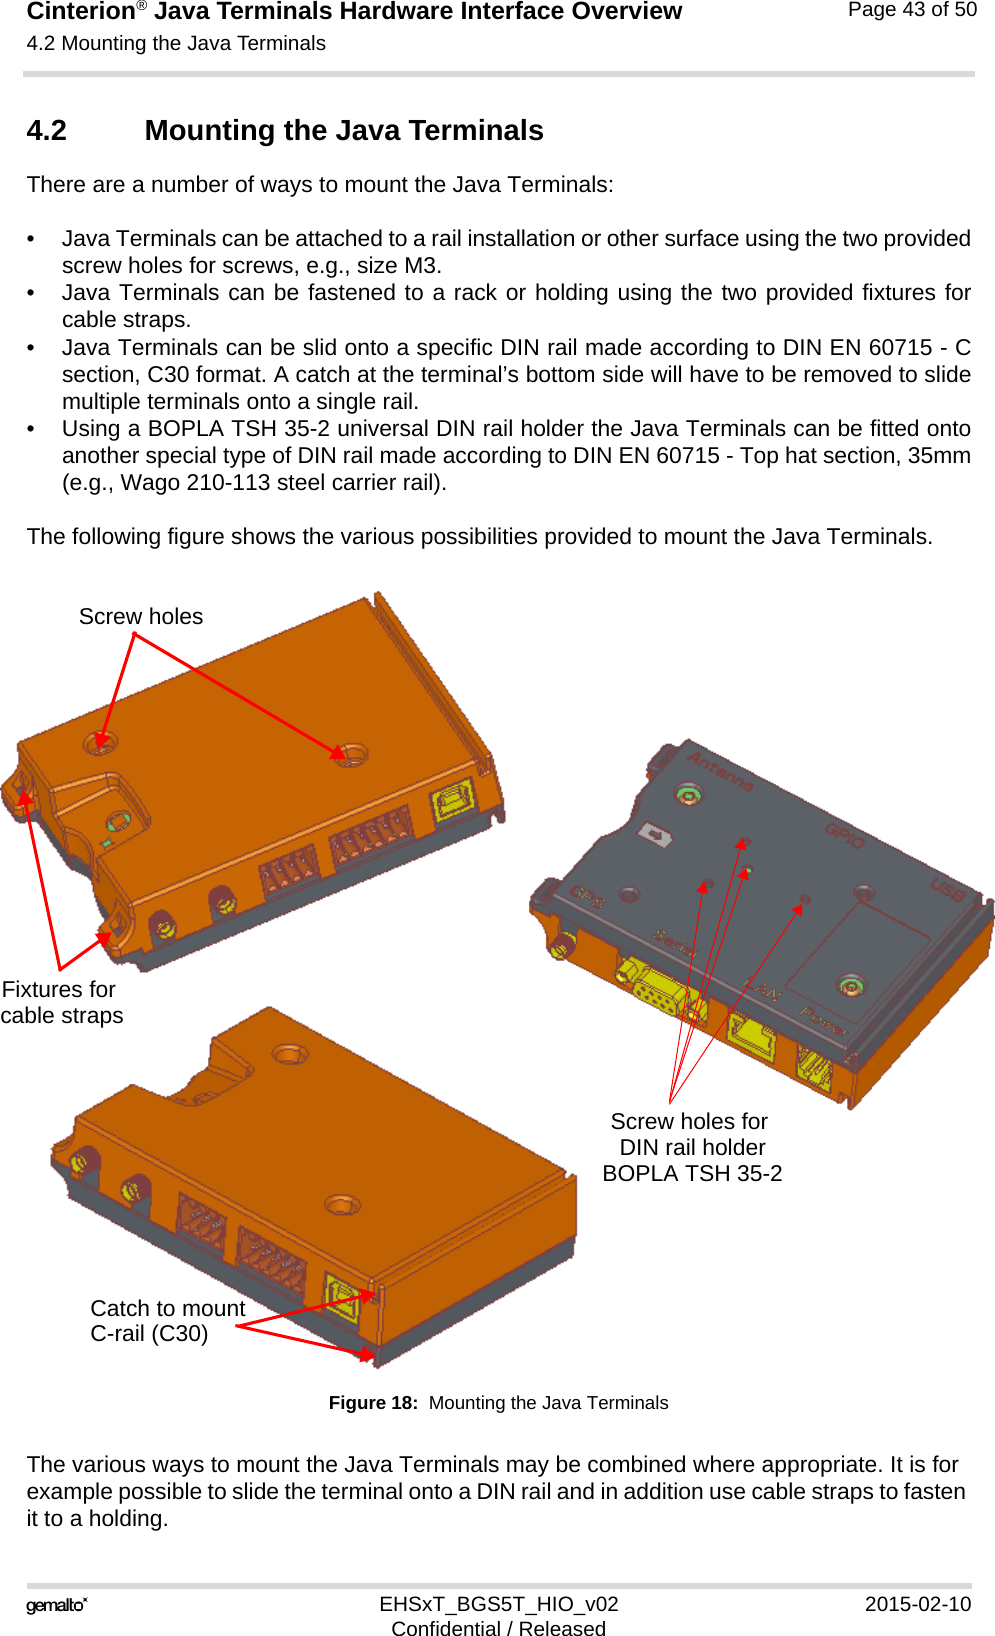 Cinterion® Java Terminals Hardware Interface Overview4.2 Mounting the Java Terminals44EHSxT_BGS5T_HIO_v02 2015-02-10Confidential / ReleasedPage 43 of 504.2 Mounting the Java TerminalsThere are a number of ways to mount the Java Terminals: • Java Terminals can be attached to a rail installation or other surface using the two providedscrew holes for screws, e.g., size M3. • Java Terminals can be fastened to a rack or holding using the two provided fixtures forcable straps.• Java Terminals can be slid onto a specific DIN rail made according to DIN EN 60715 - Csection, C30 format. A catch at the terminal’s bottom side will have to be removed to slidemultiple terminals onto a single rail.• Using a BOPLA TSH 35-2 universal DIN rail holder the Java Terminals can be fitted ontoanother special type of DIN rail made according to DIN EN 60715 - Top hat section, 35mm(e.g., Wago 210-113 steel carrier rail).The following figure shows the various possibilities provided to mount the Java Terminals.Figure 18:  Mounting the Java TerminalsThe various ways to mount the Java Terminals may be combined where appropriate. It is for example possible to slide the terminal onto a DIN rail and in addition use cable straps to fasten it to a holding.Catch to mountScrew holes for Screw holesFixtures for cable strapsDIN rail holderC-rail (C30)BOPLA TSH 35-2